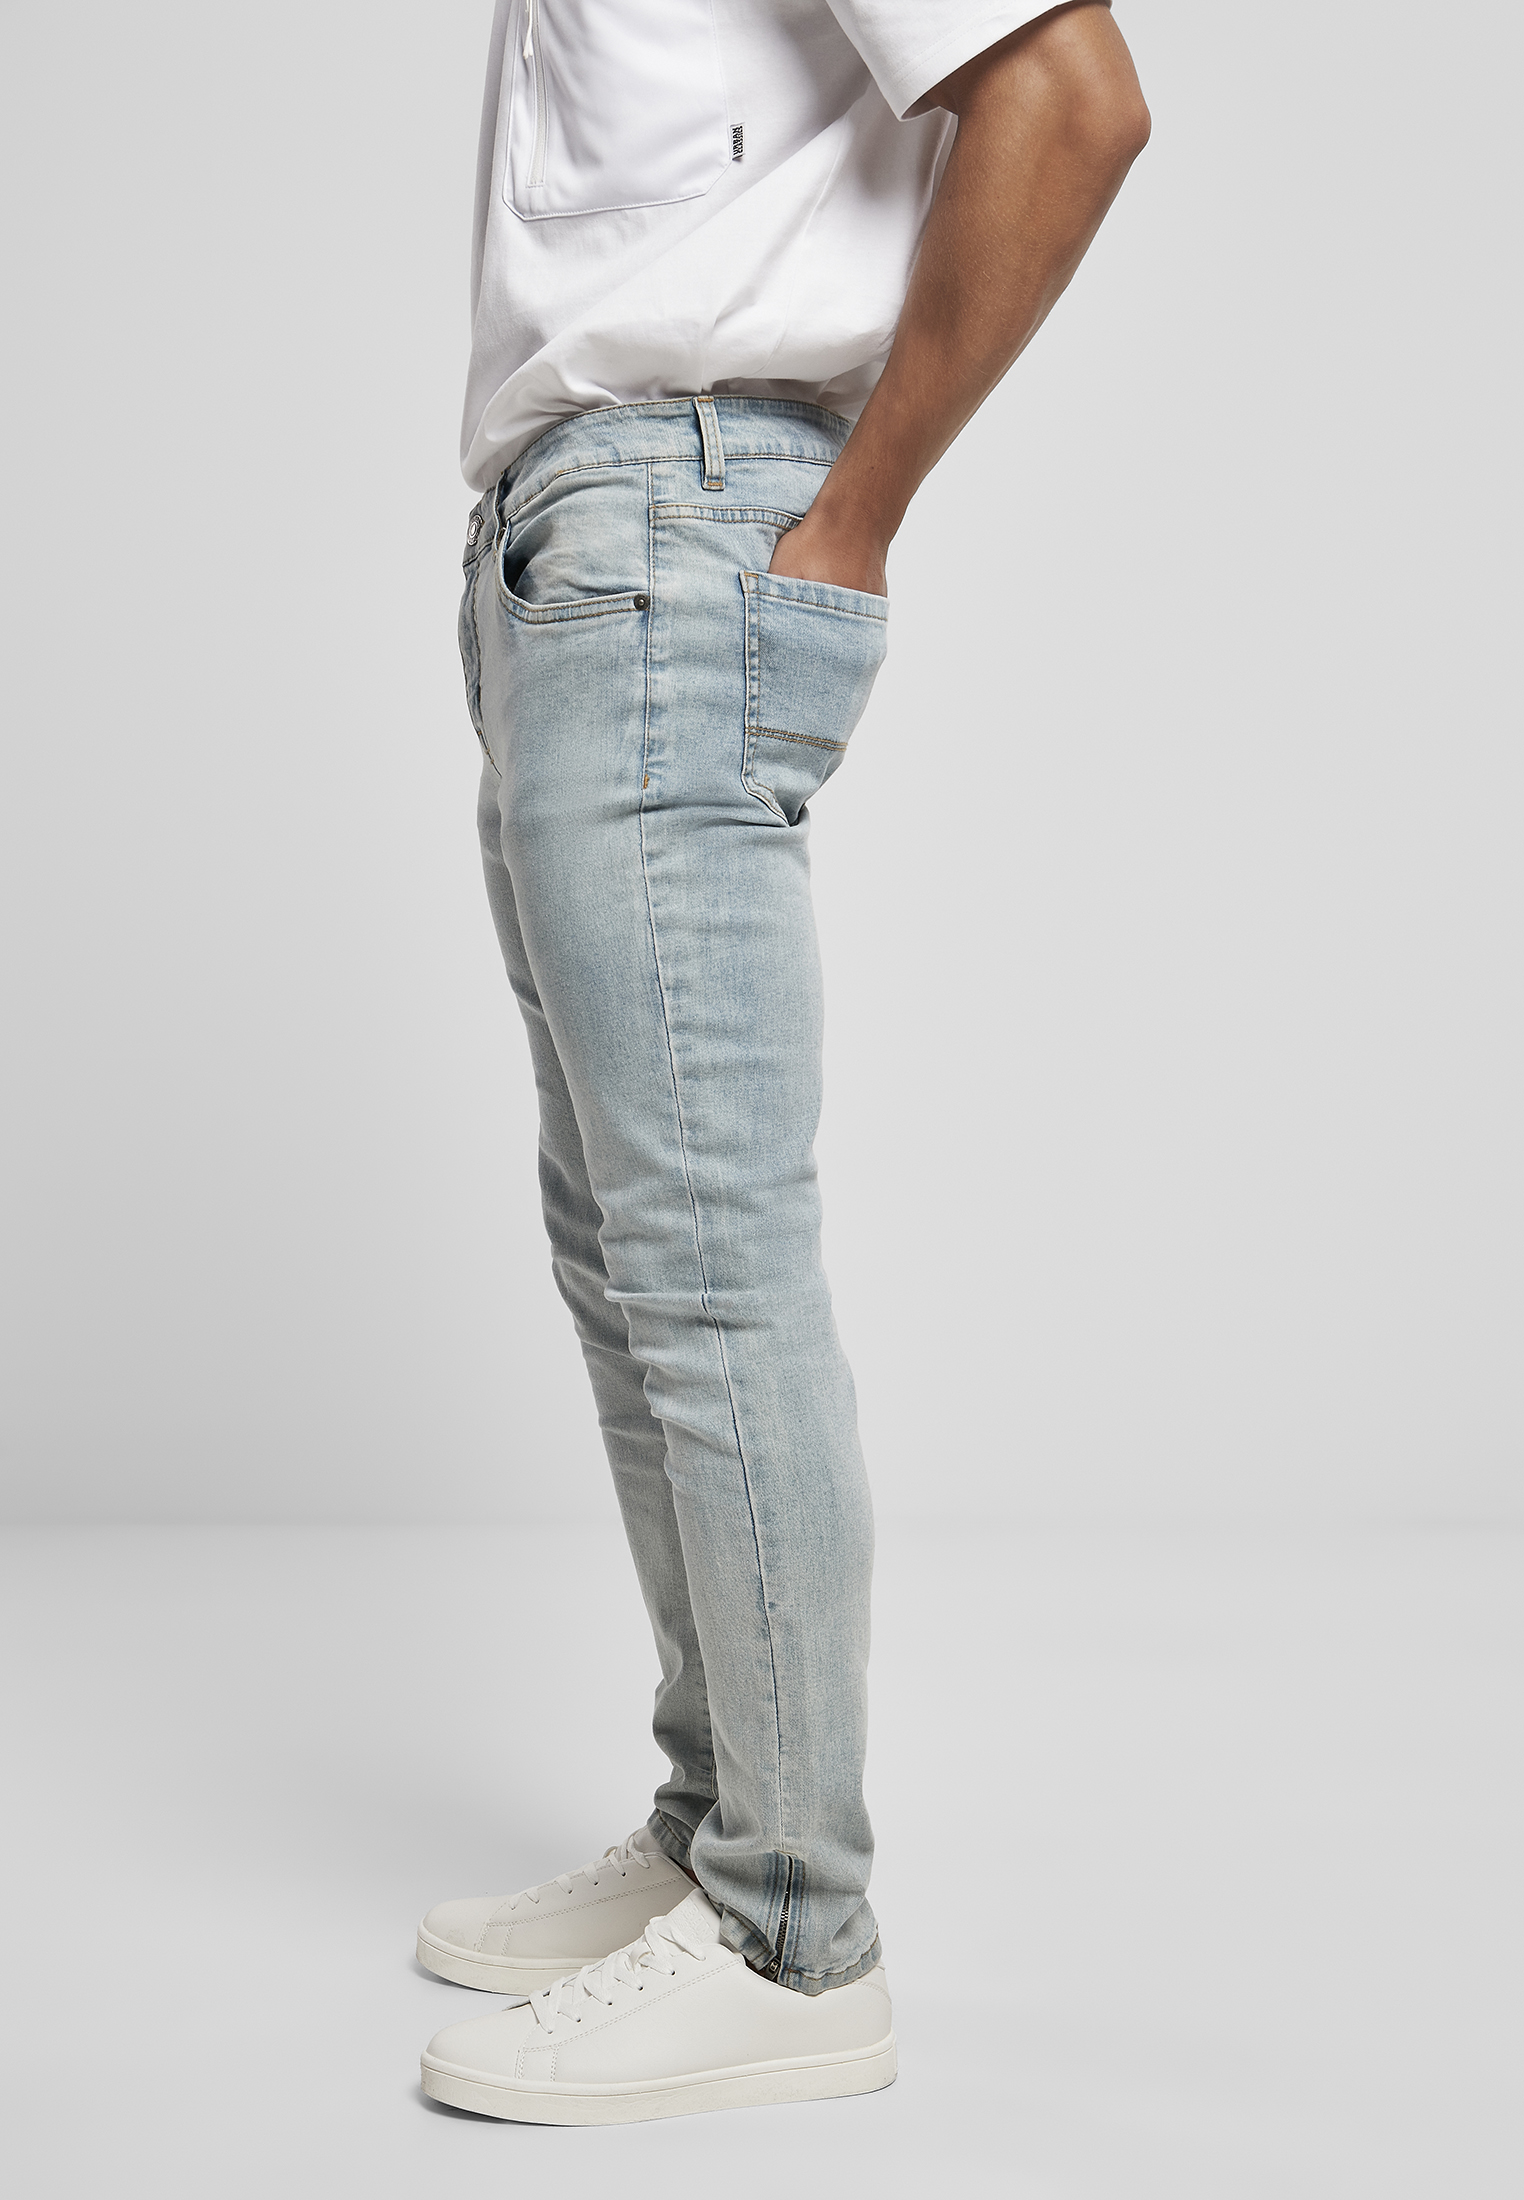 Hosen Slim Fit Zip Jeans in Farbe lighter washed